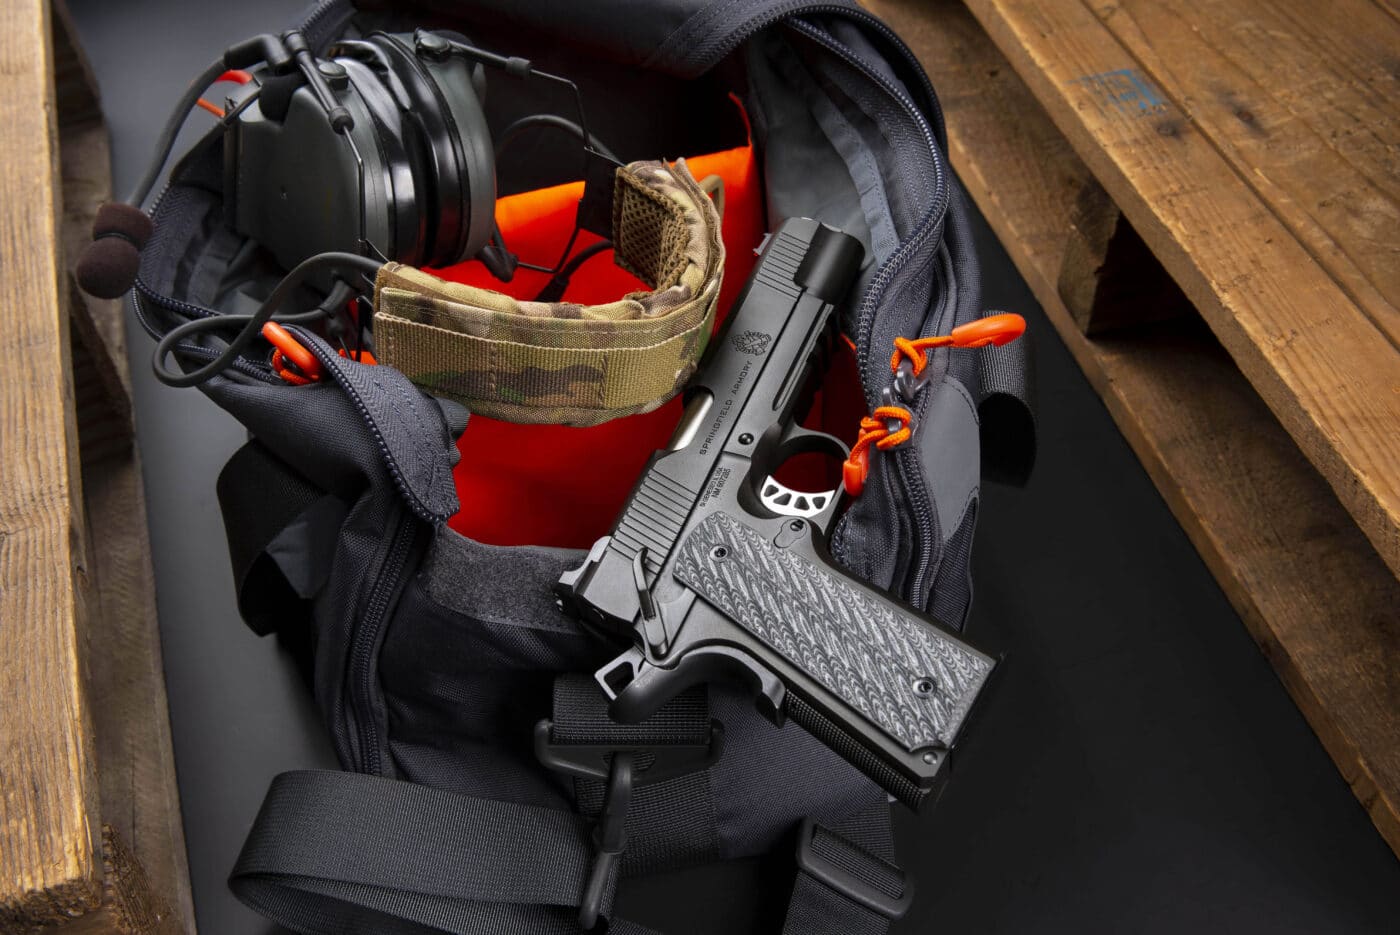 Gear for the shooting range